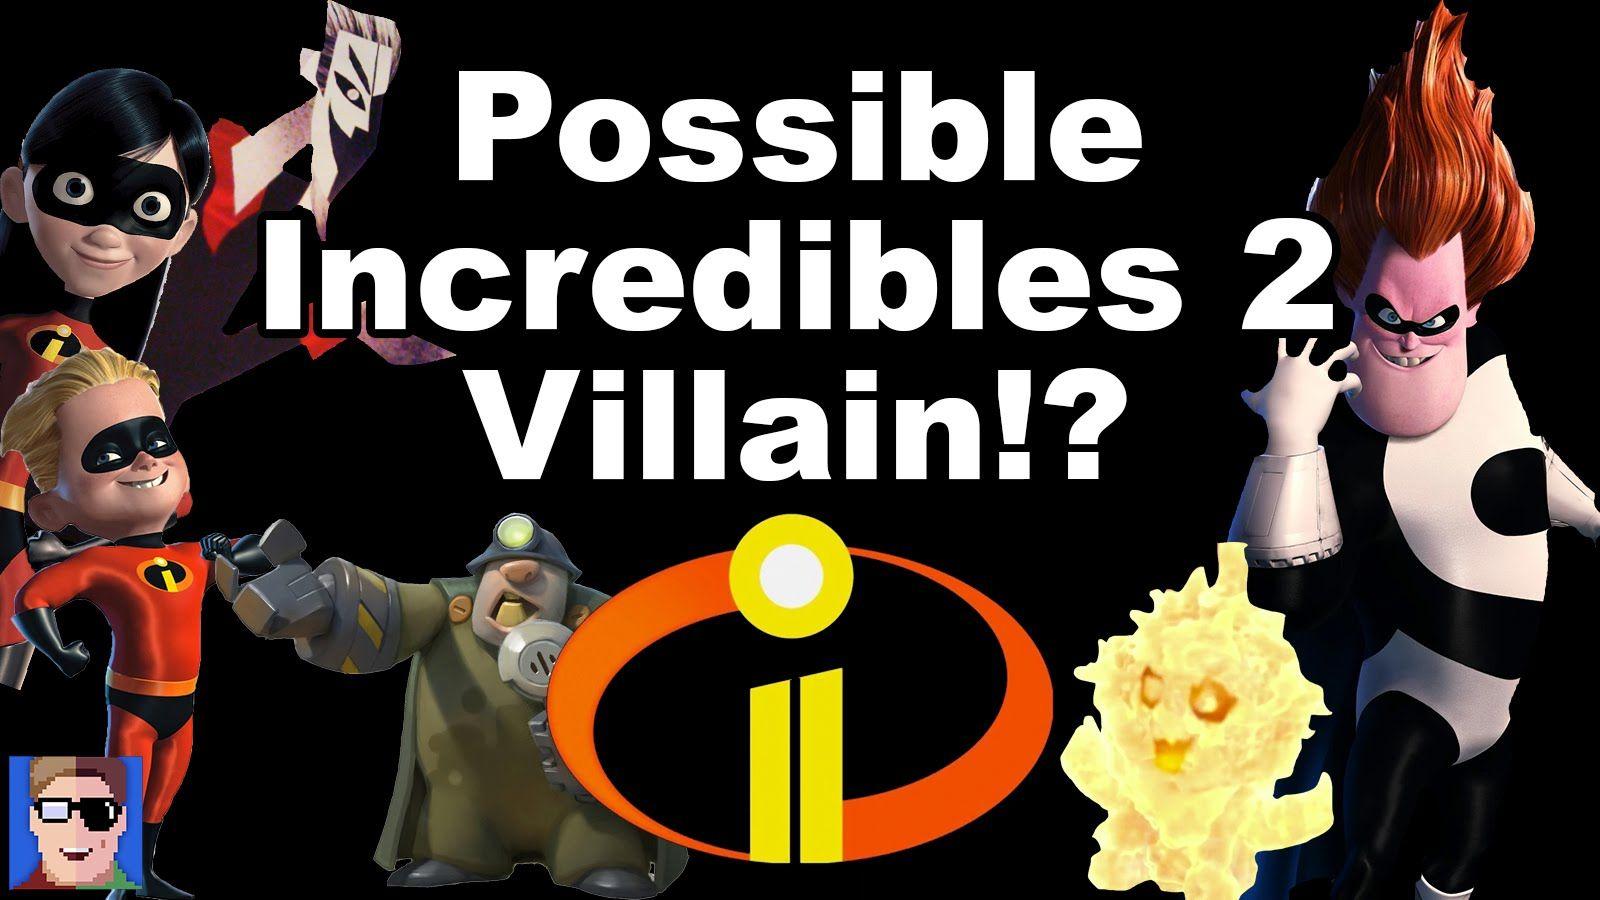 Potential Villains for The Incredibles 2